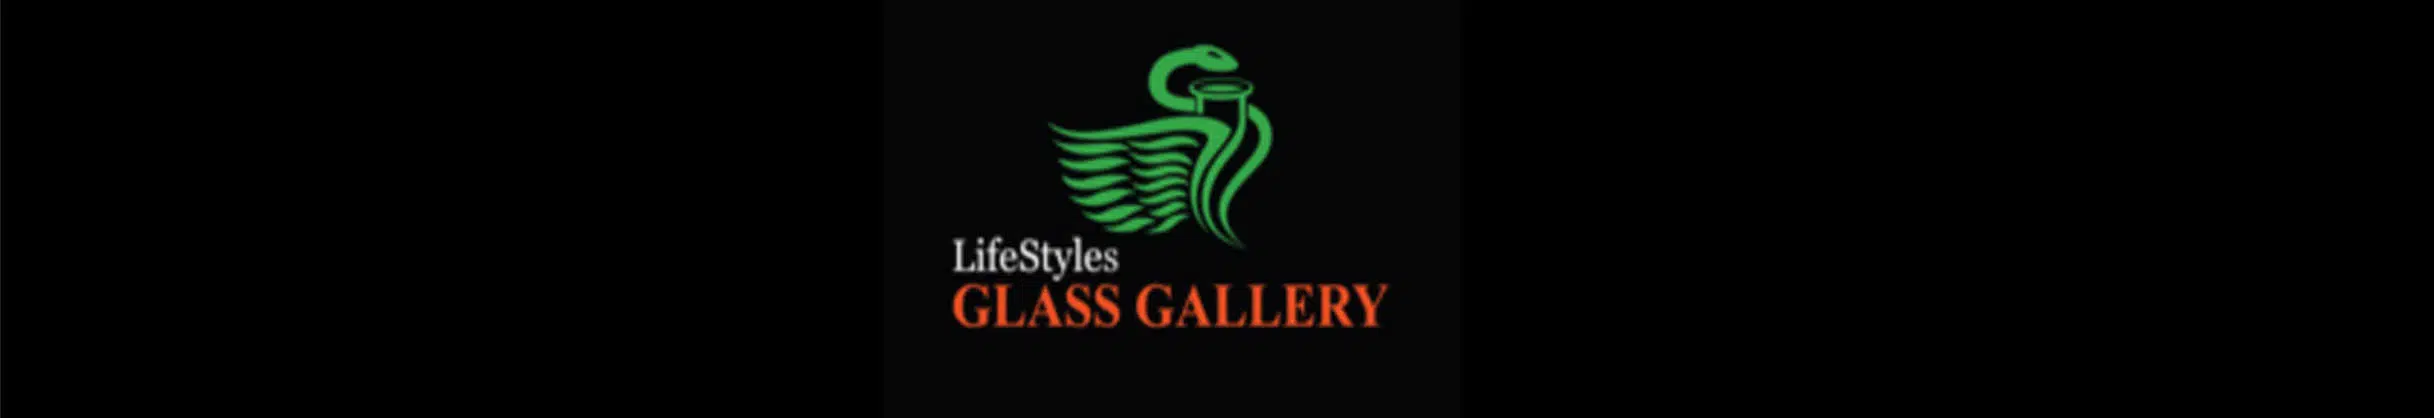 image of life style glass gallery